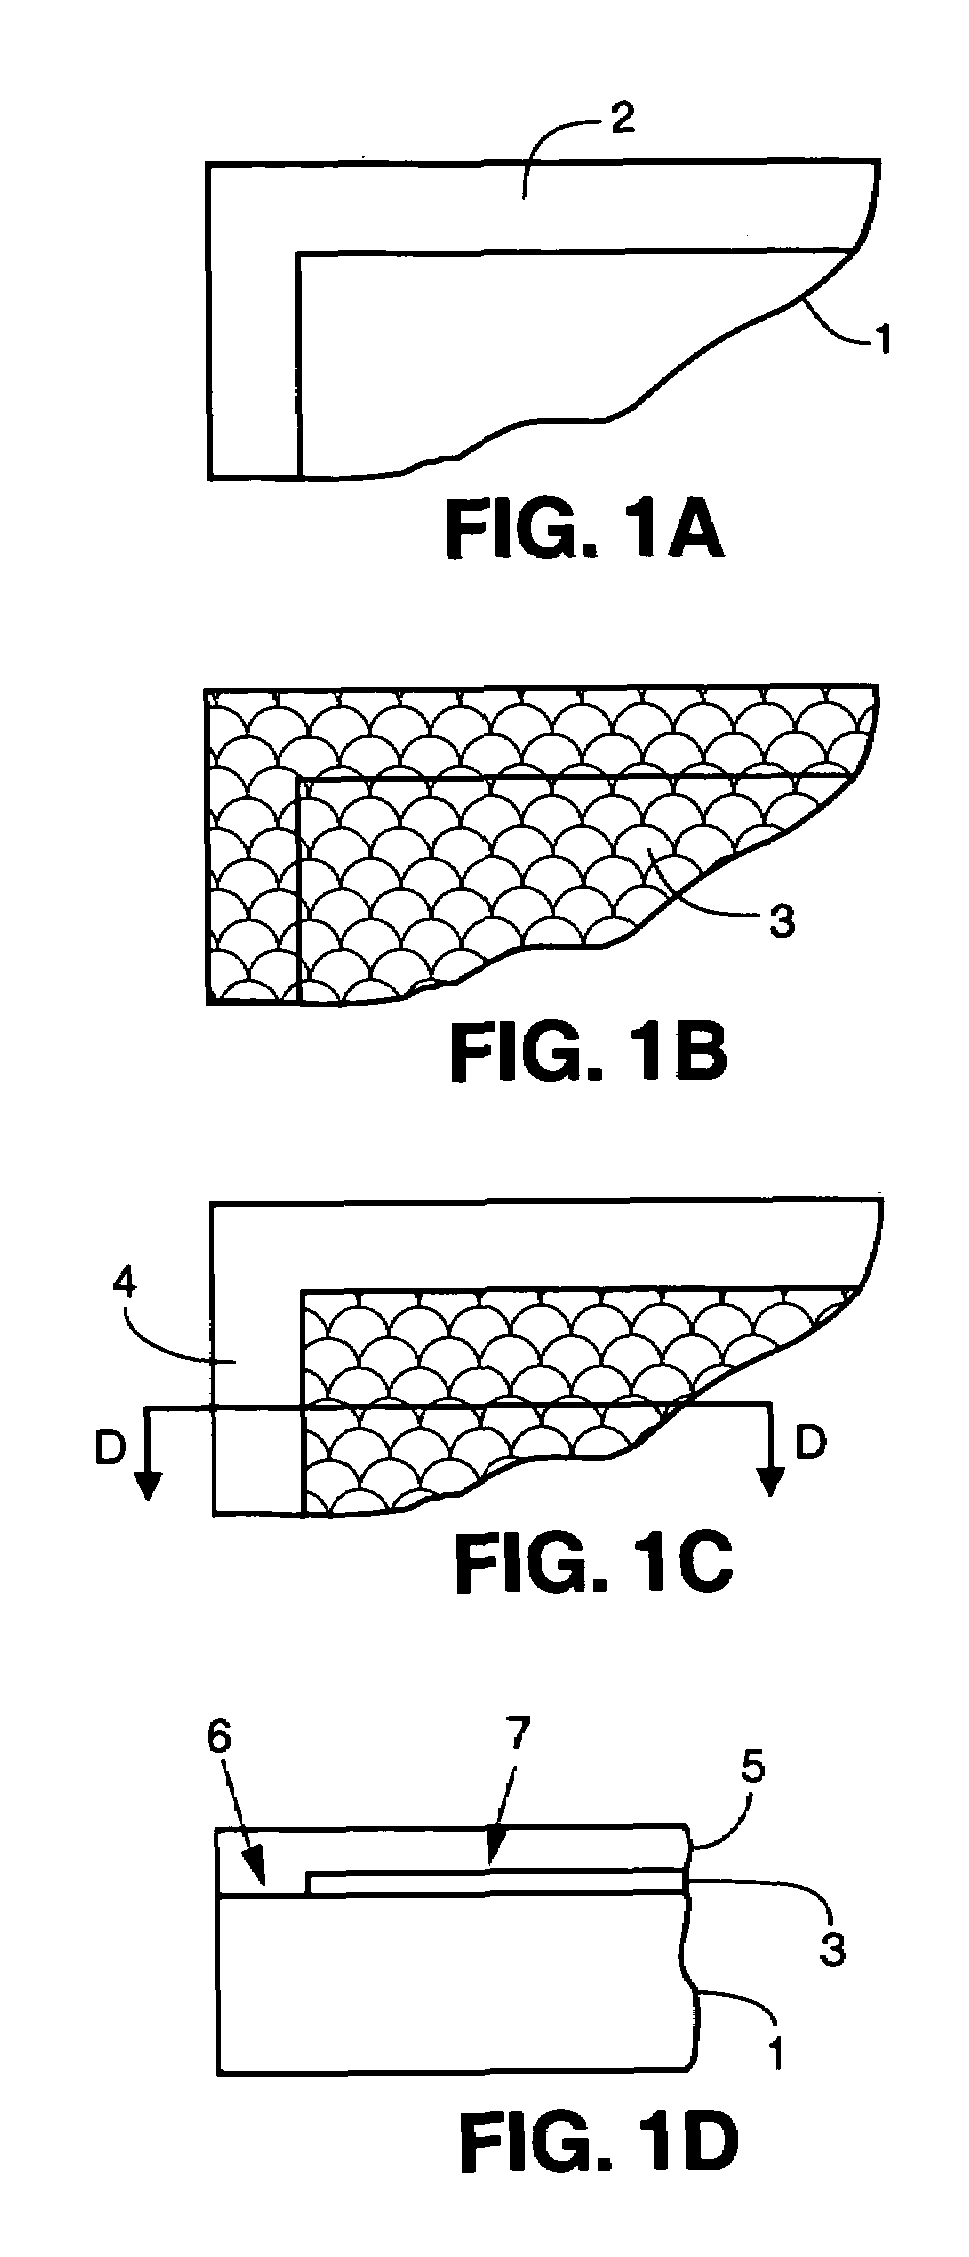 Fabrication method for electronic system modules